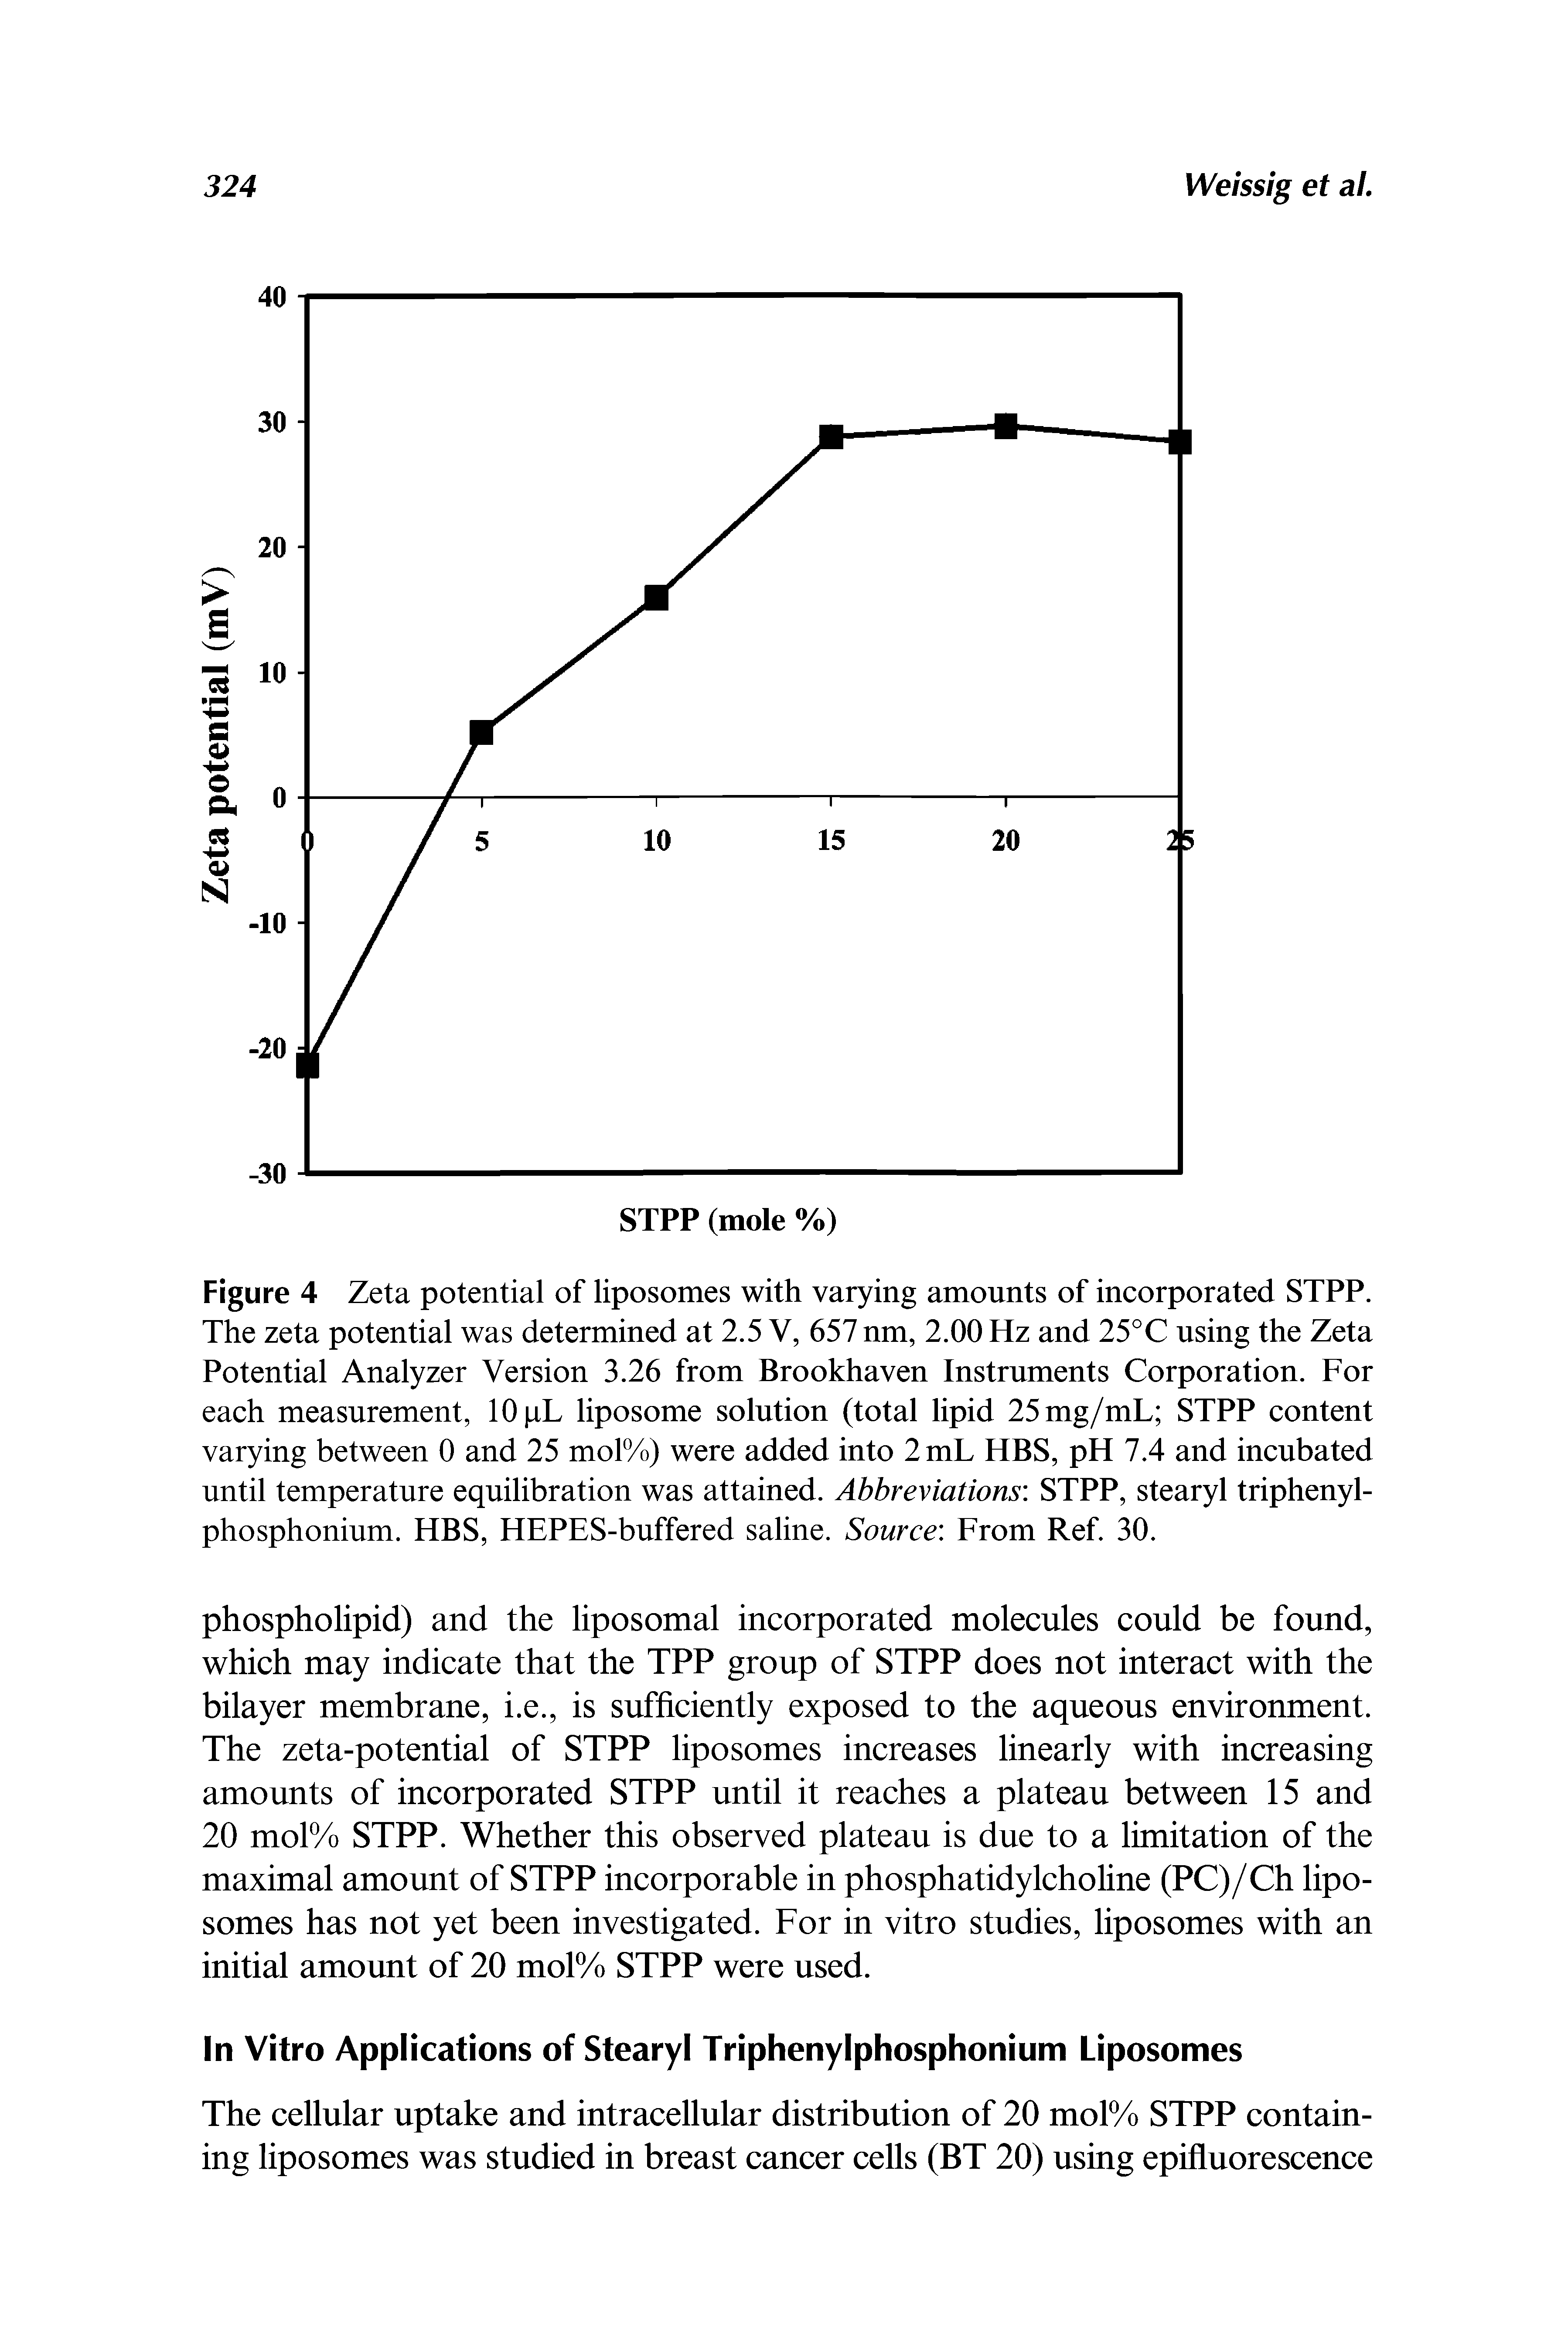 Figure 4 Zeta potential of liposomes with varying amounts of incorporated STPP. The zeta potential was determined at 2.5 V, 657 nm, 2.00 Hz and 25°C using the Zeta Potential Analyzer Version 3.26 from Brookhaven Instruments Corporation. For each measurement, 10 pL liposome solution (total lipid 25mg/mL STPP content varying between 0 and 25 mol%) were added into 2mL HBS, pH 7.4 and incubated until temperature equilibration was attained. Abbreviations STPP, stearyl triphenyl-phosphonium. HBS, HEPES-buffered saline. Source From Ref. 30.